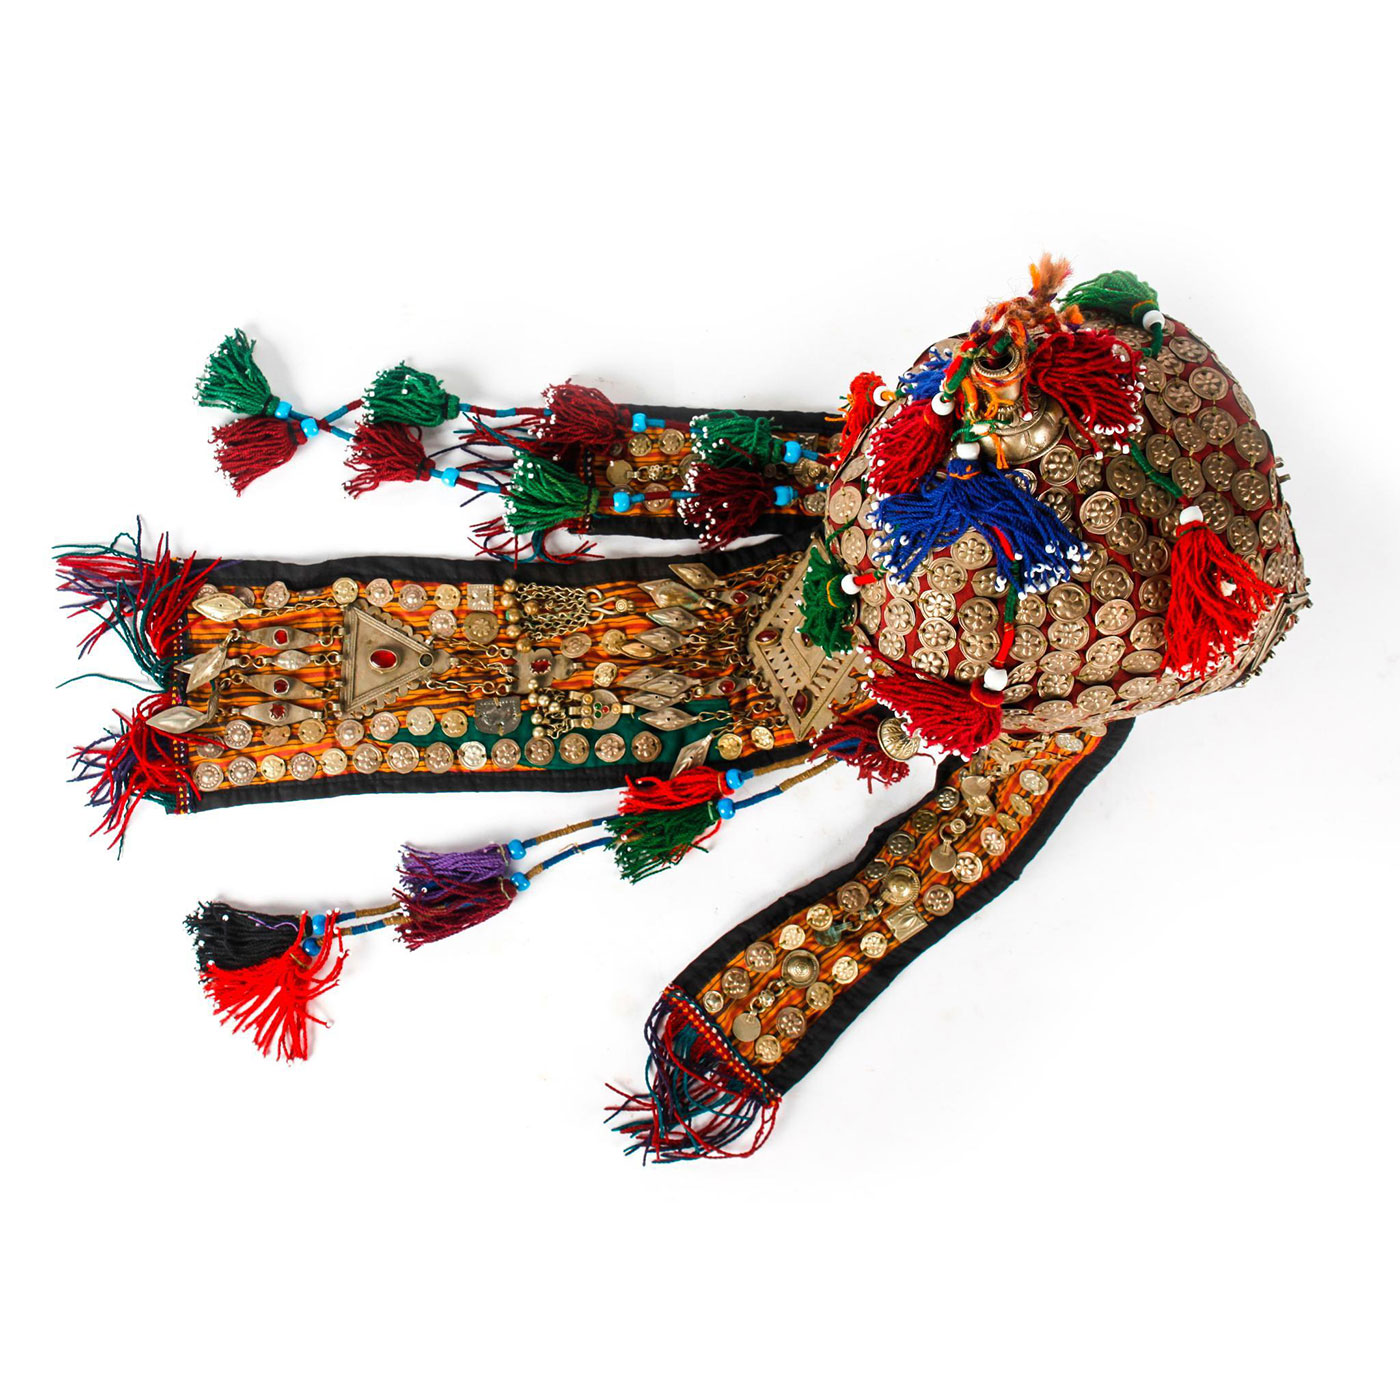 TURKMENISTANI ELABORATE HAND SEWN HEADDRESS WITH COINS - Image 2 of 8